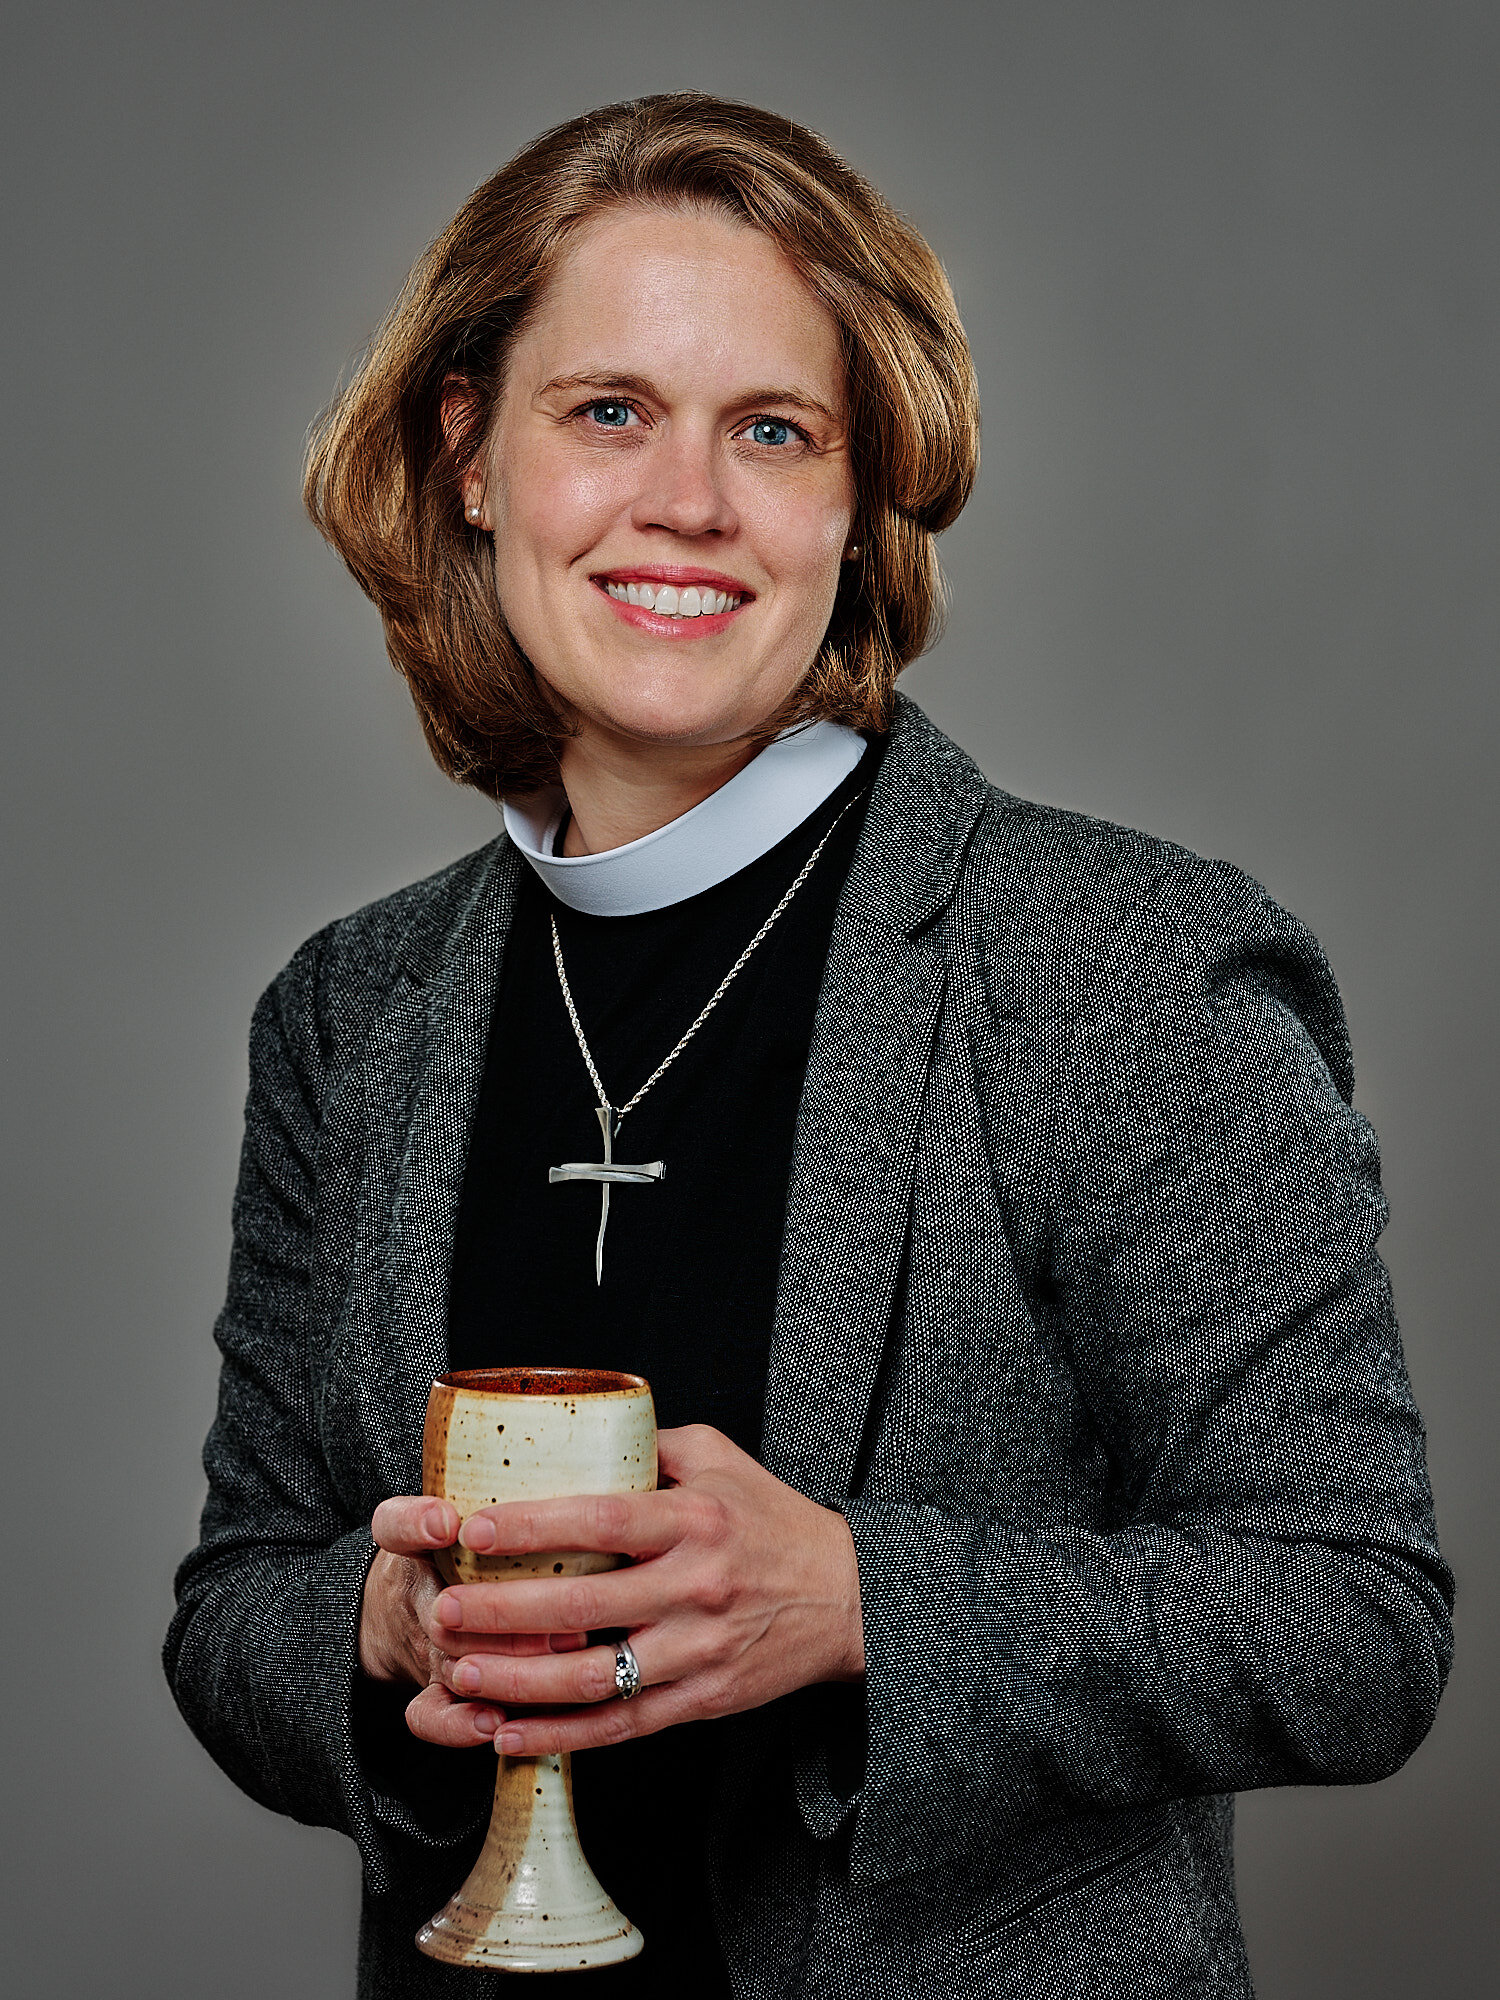  Amy Wagner is Director of Congregational Development and Revitalization for the Western PA Conference. She’s been assigned to a new congregation. They display portraits of lead pastors at the church. 